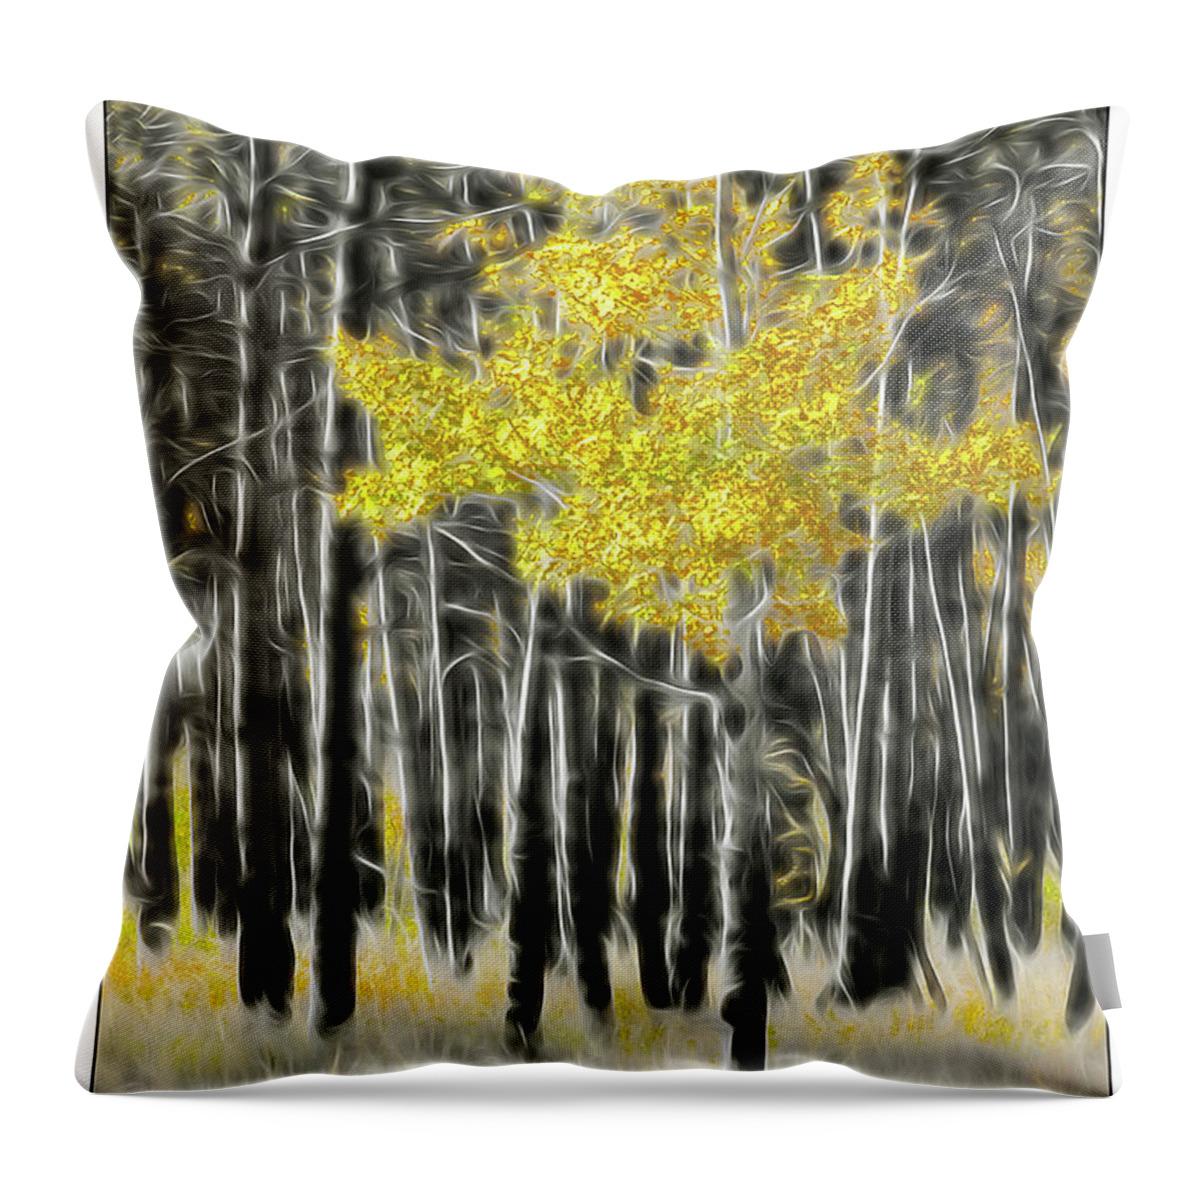 Aspen Throw Pillow featuring the photograph Feathered Aspen by Peggy Dietz